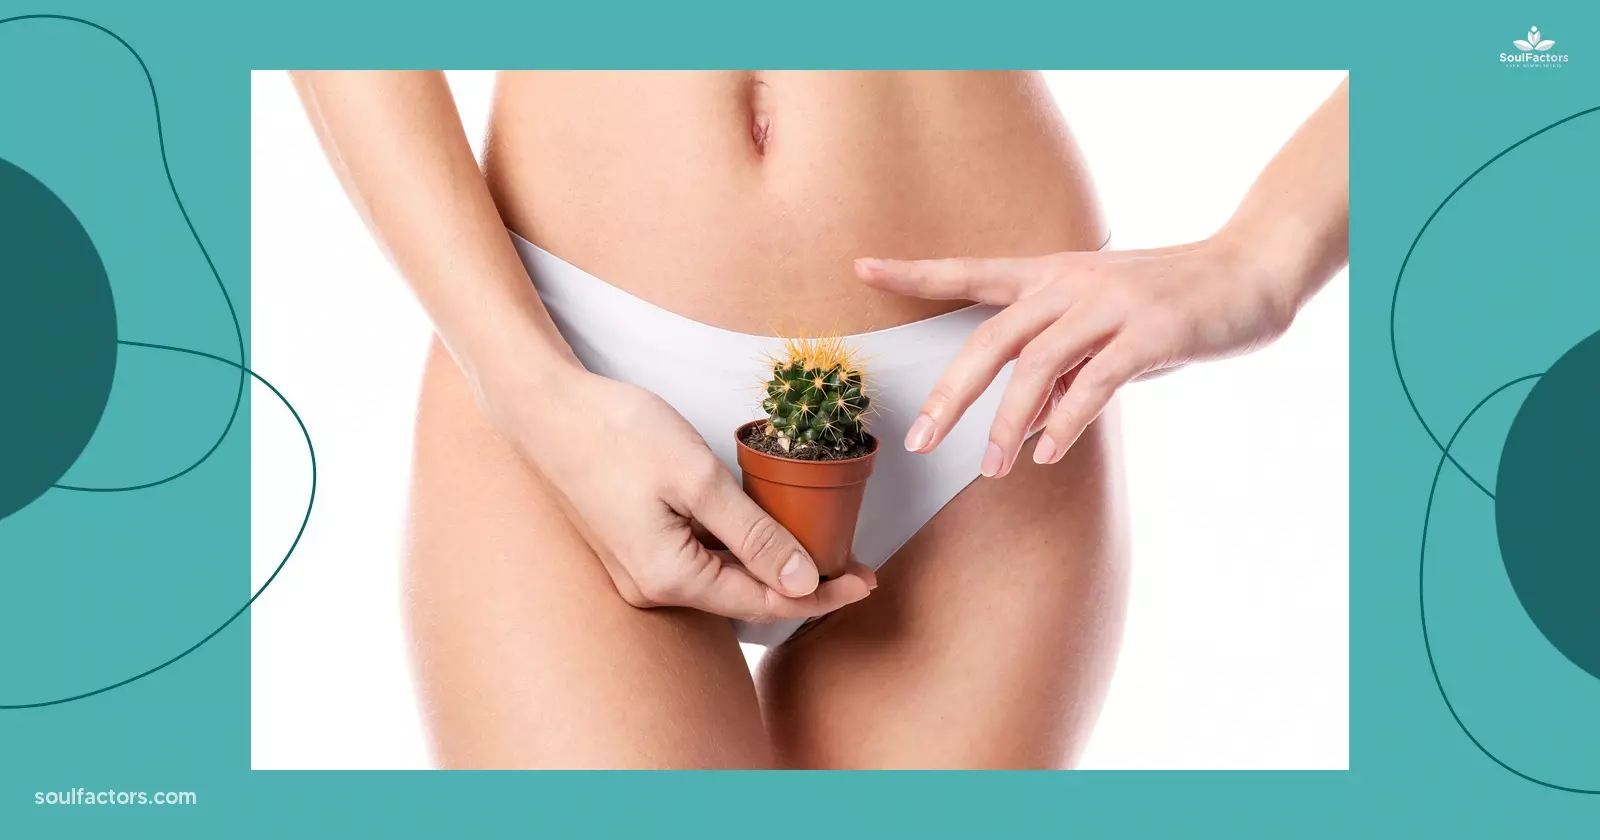 SAFEST WAYS TO REMOVE PUBIC HAIR AT HOME